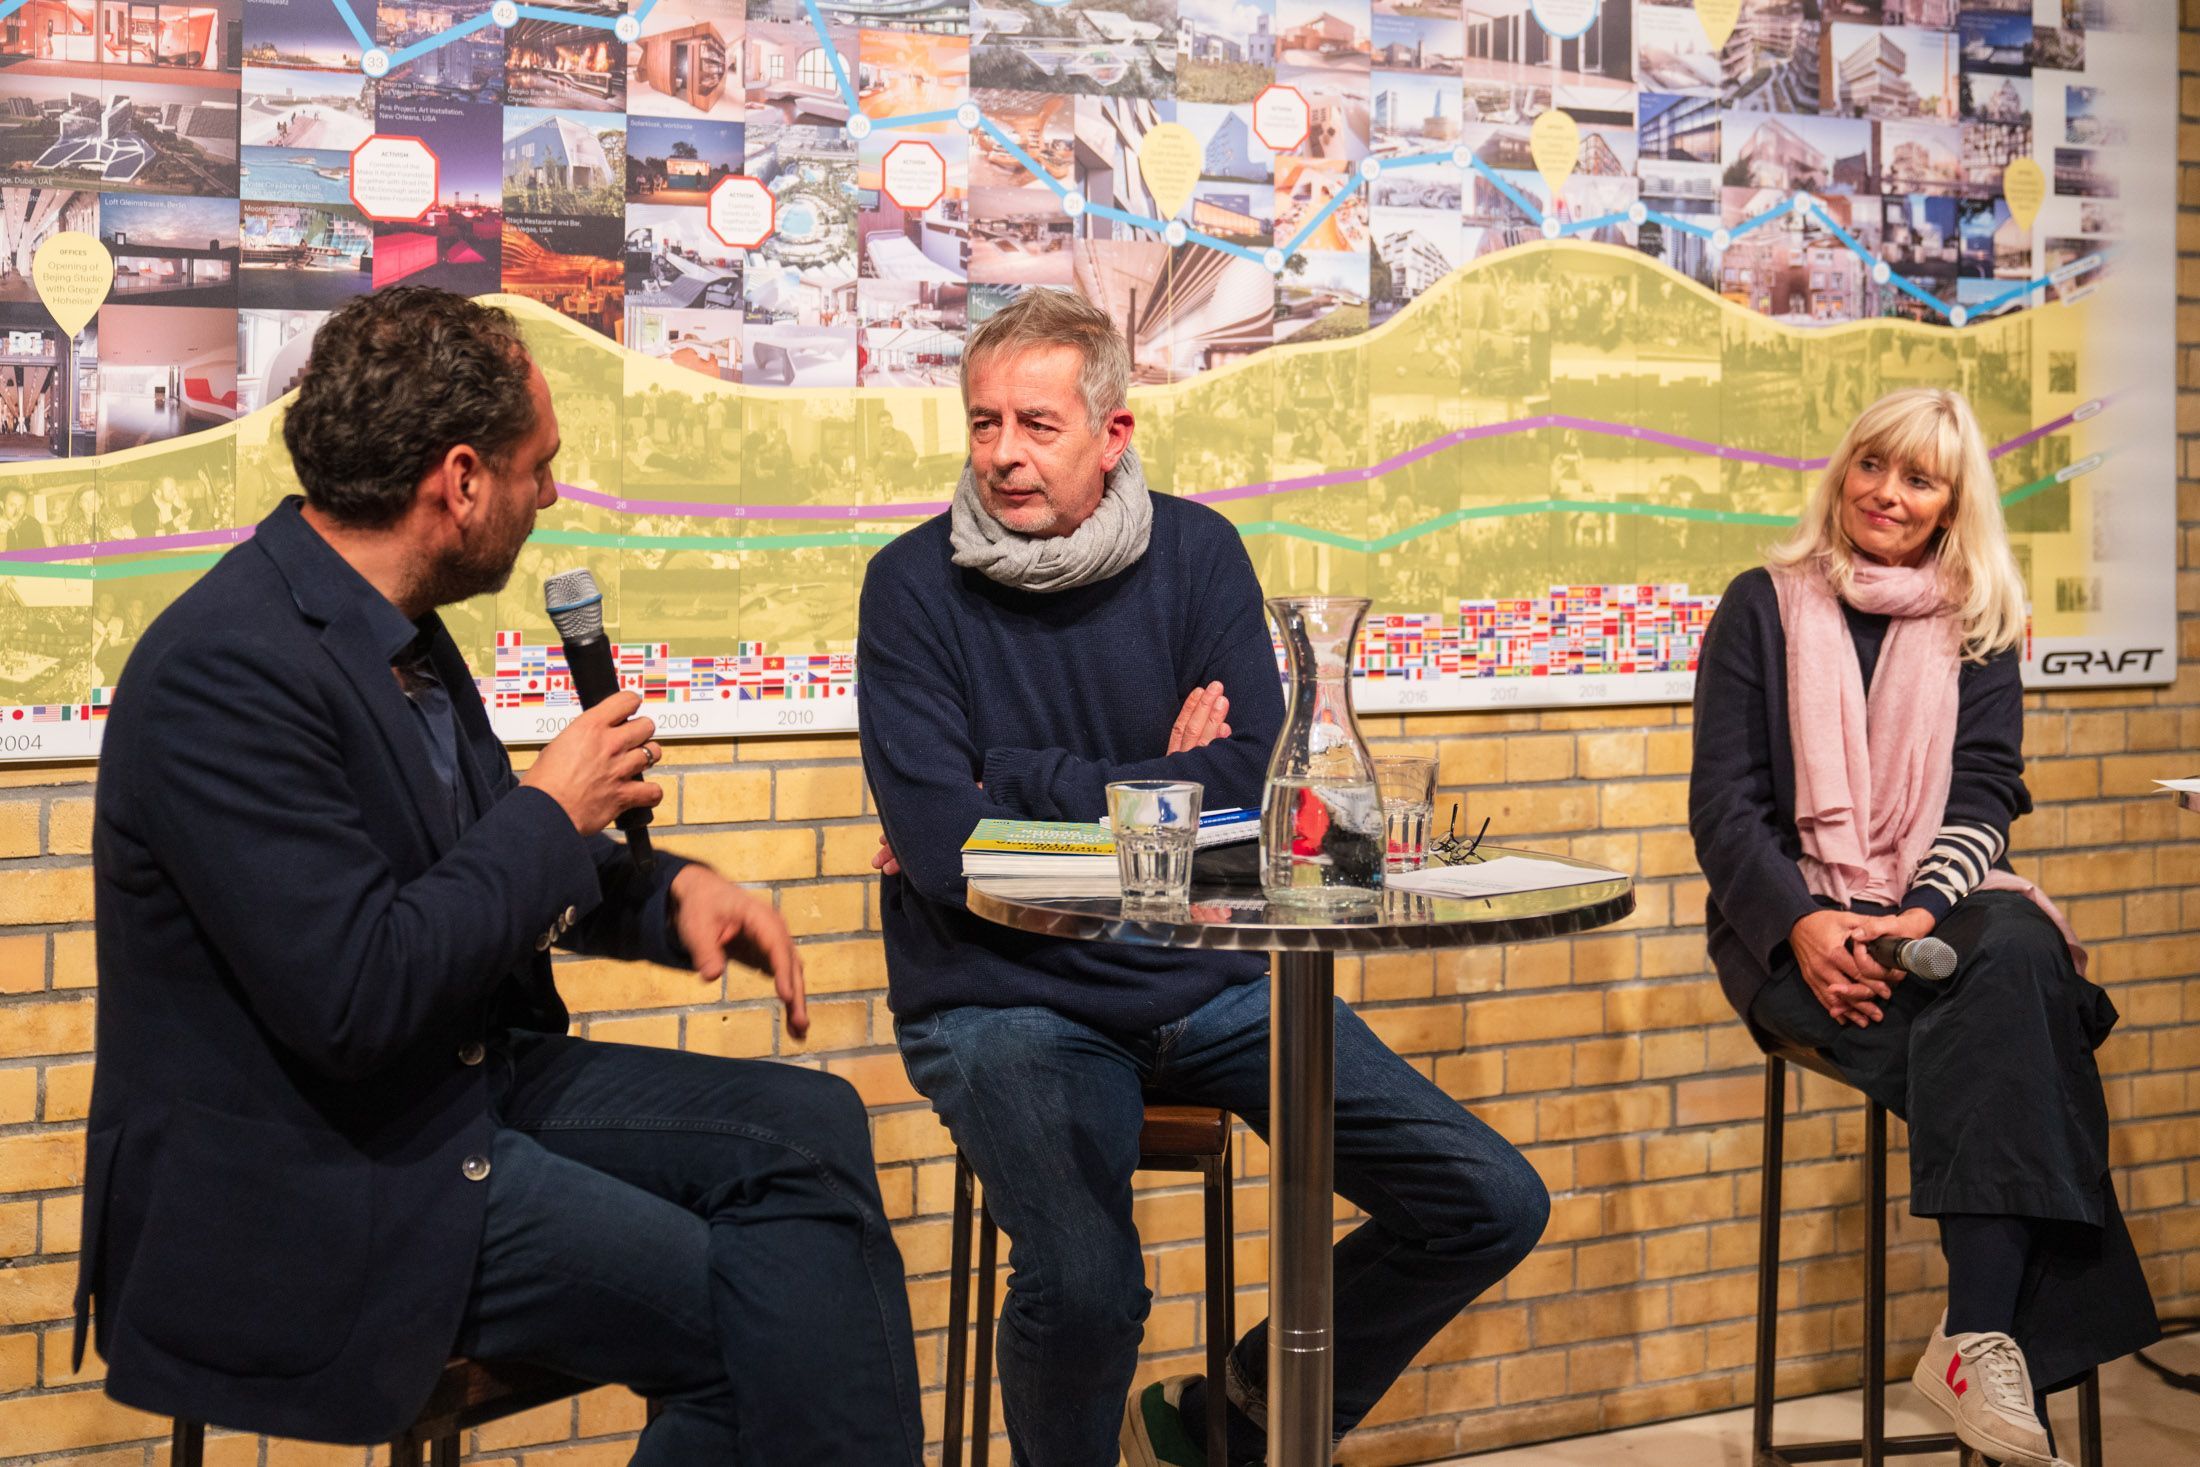 Panel "Architecture in Times of Need": Thomas Willemeit with Andreas Tölke (Be an Angel e.v.) and Nicola Borgmann (Architekturgalerie München) (c) GRAFT